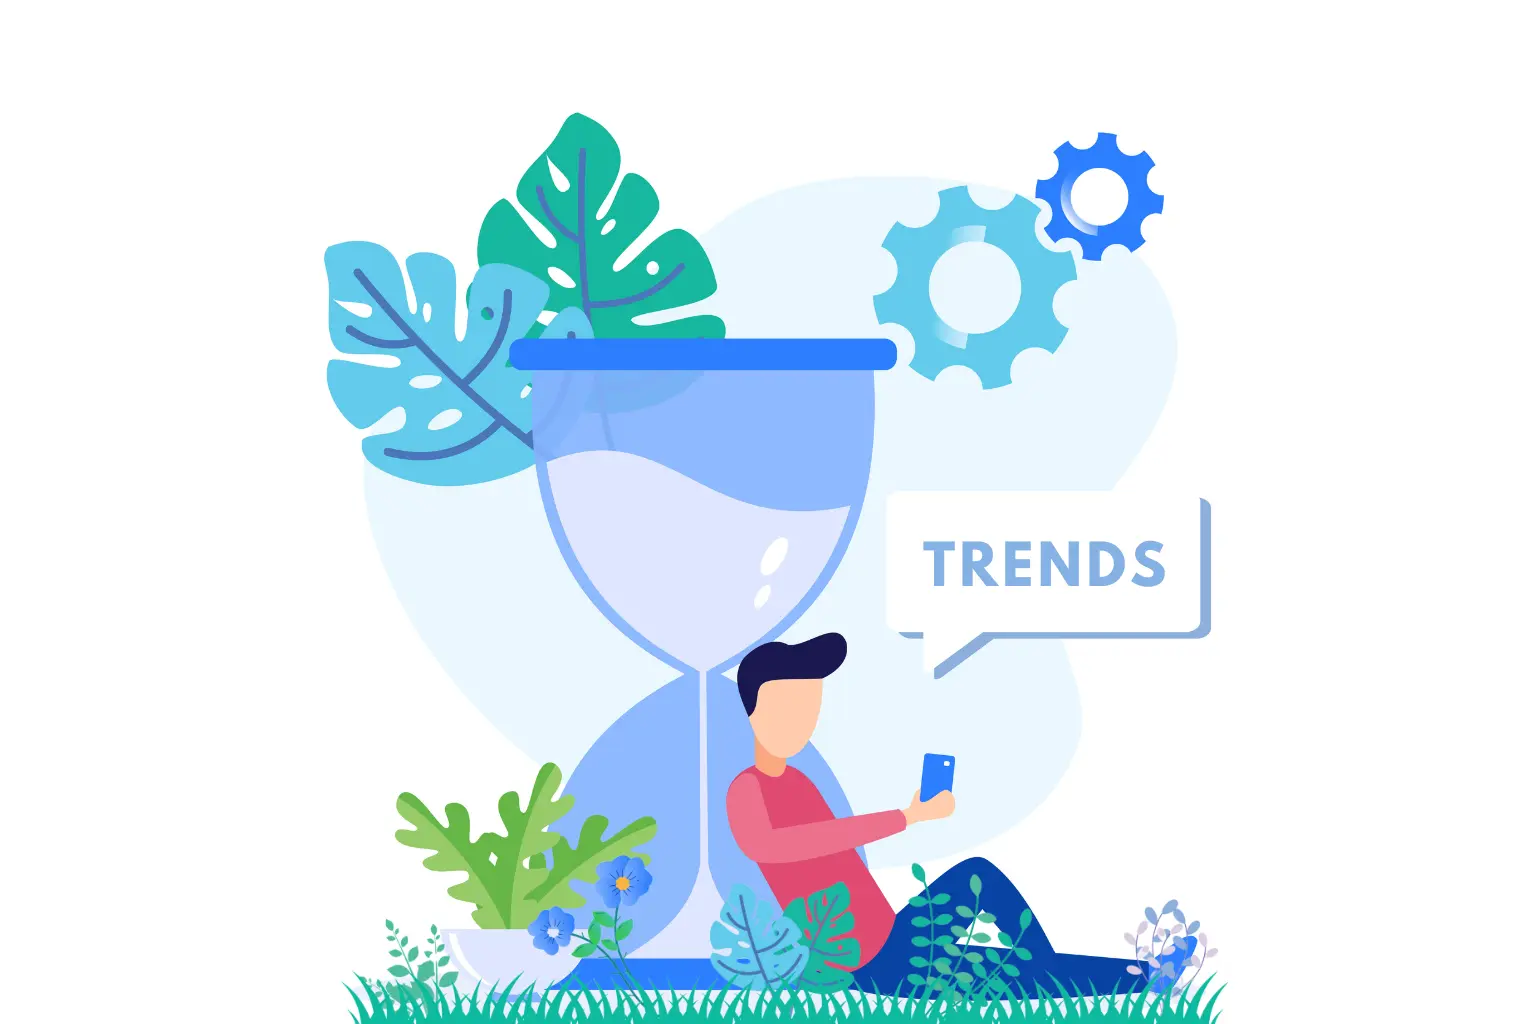  A person sitting in the grass with a phone reviewing trends Illustration vector graphic